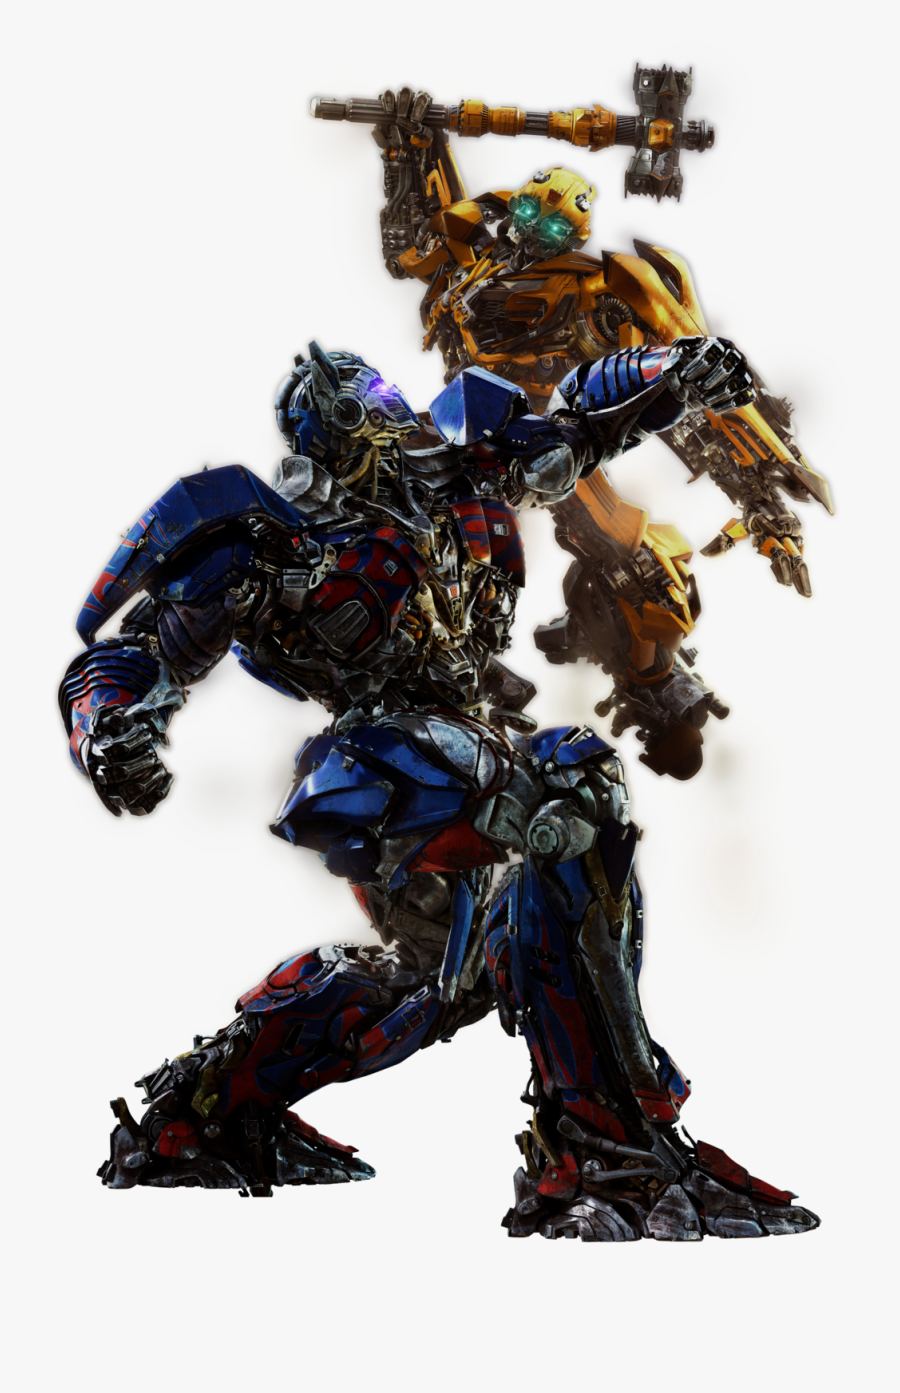 Bumblebee Optimus Prime Hound Transformers - Transformers The Last Knight Png, Transparent Clipart